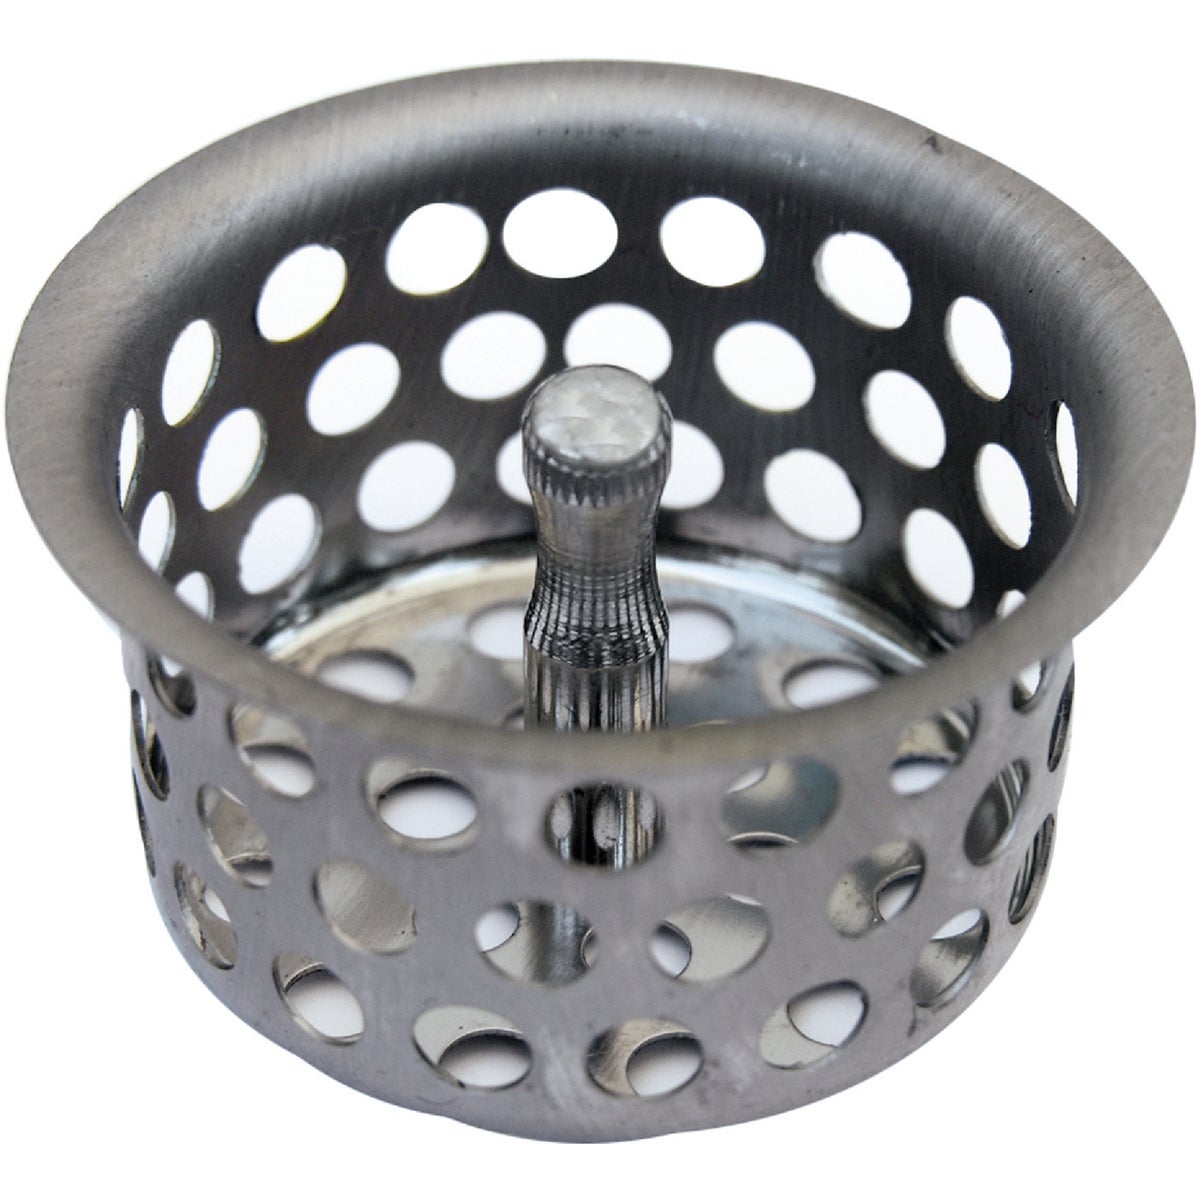 Lasco 1-1/2 In. Chrome Removable Kitchen Strainer Cup with Post